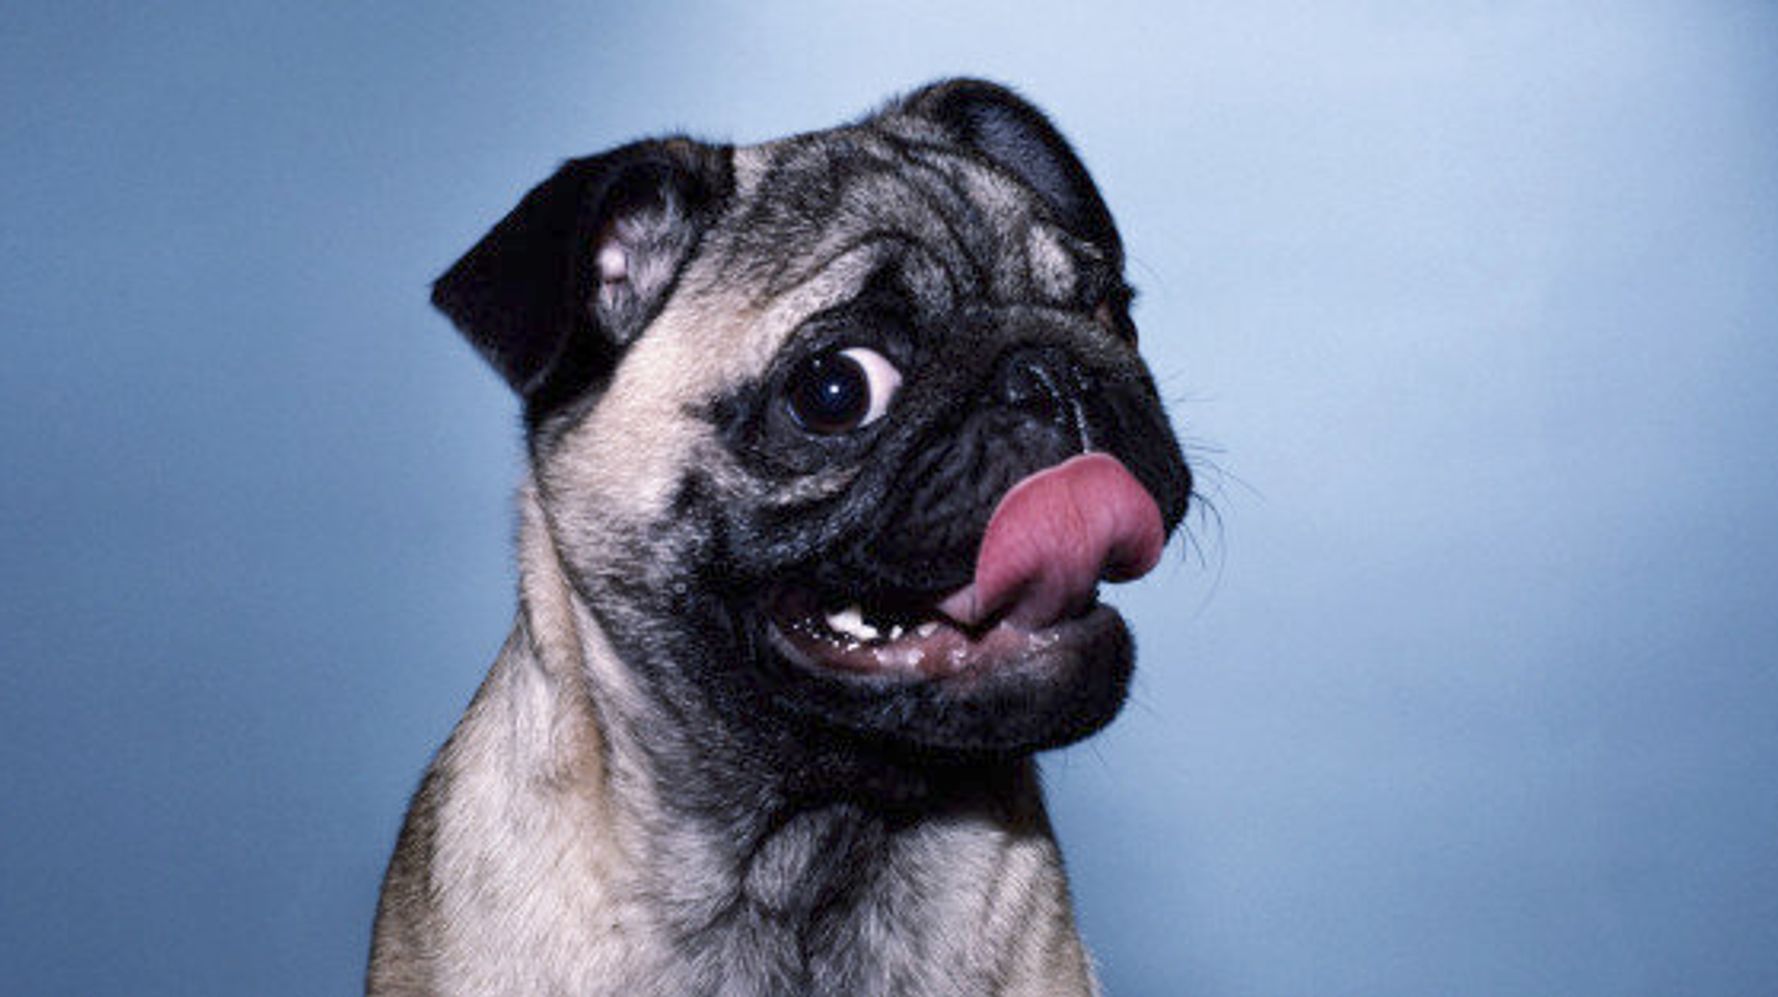 The deadly reason why you shouldn't let dogs lick your face